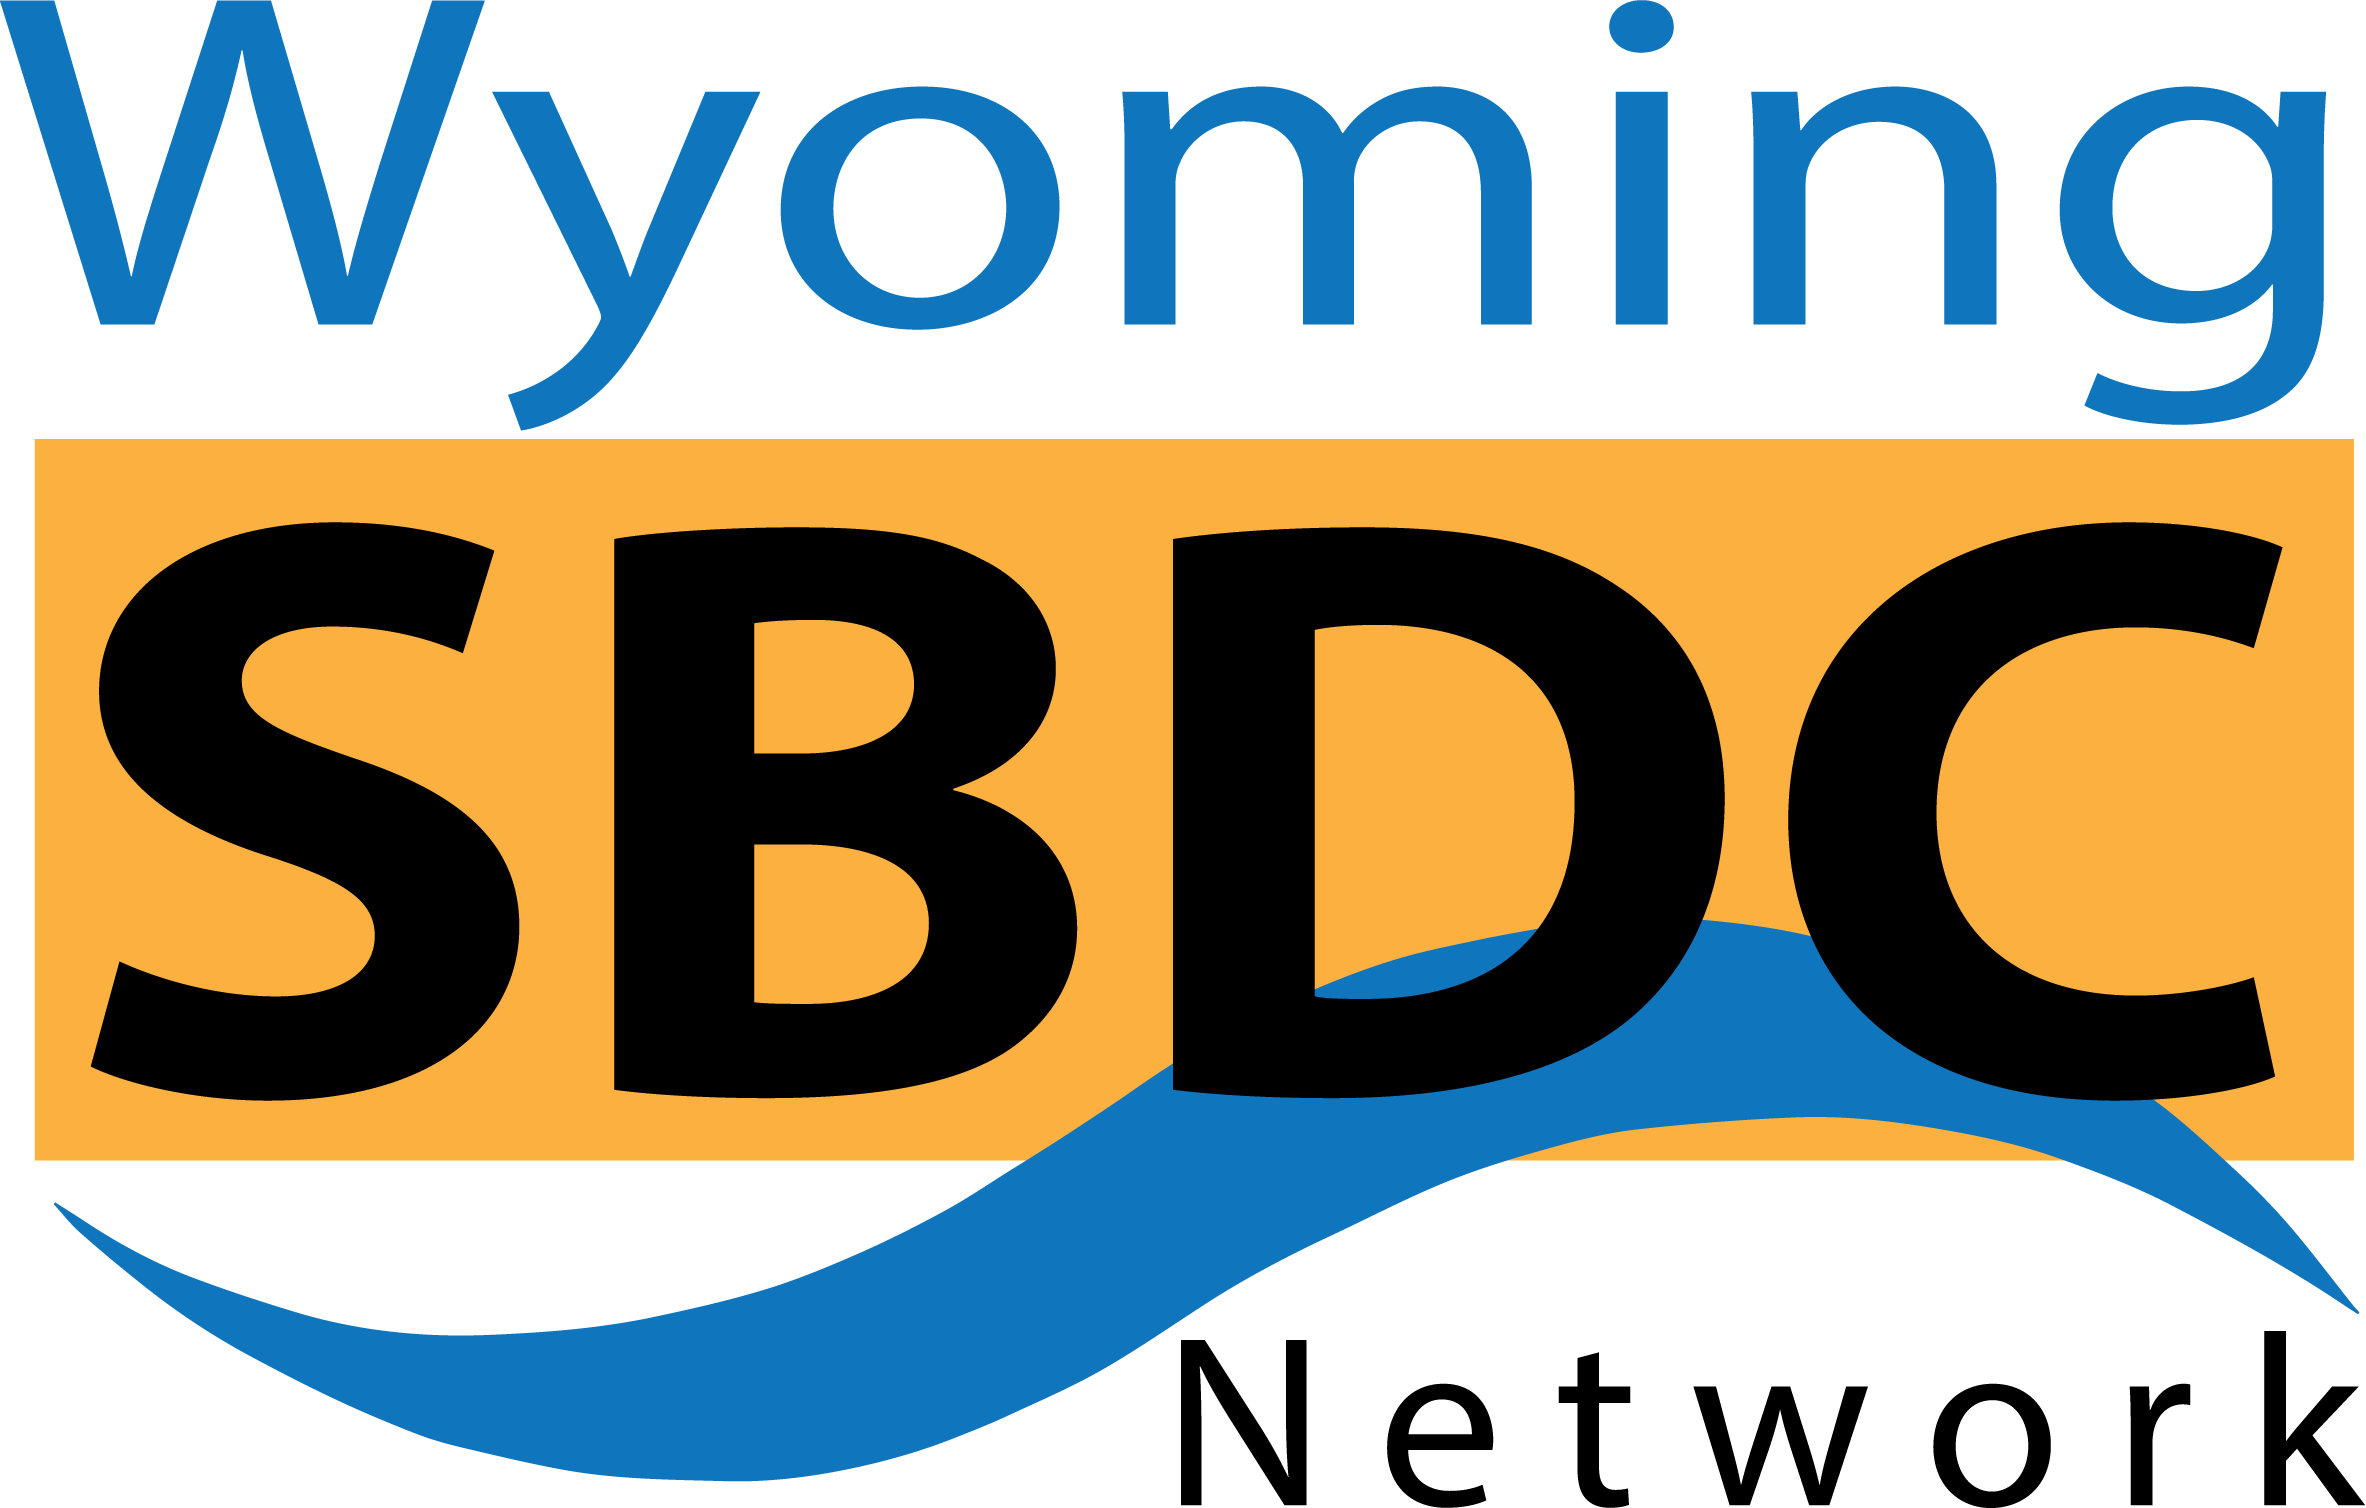 Wyoming SBDC Network Receives Grant to Commercialize Tech Innovations